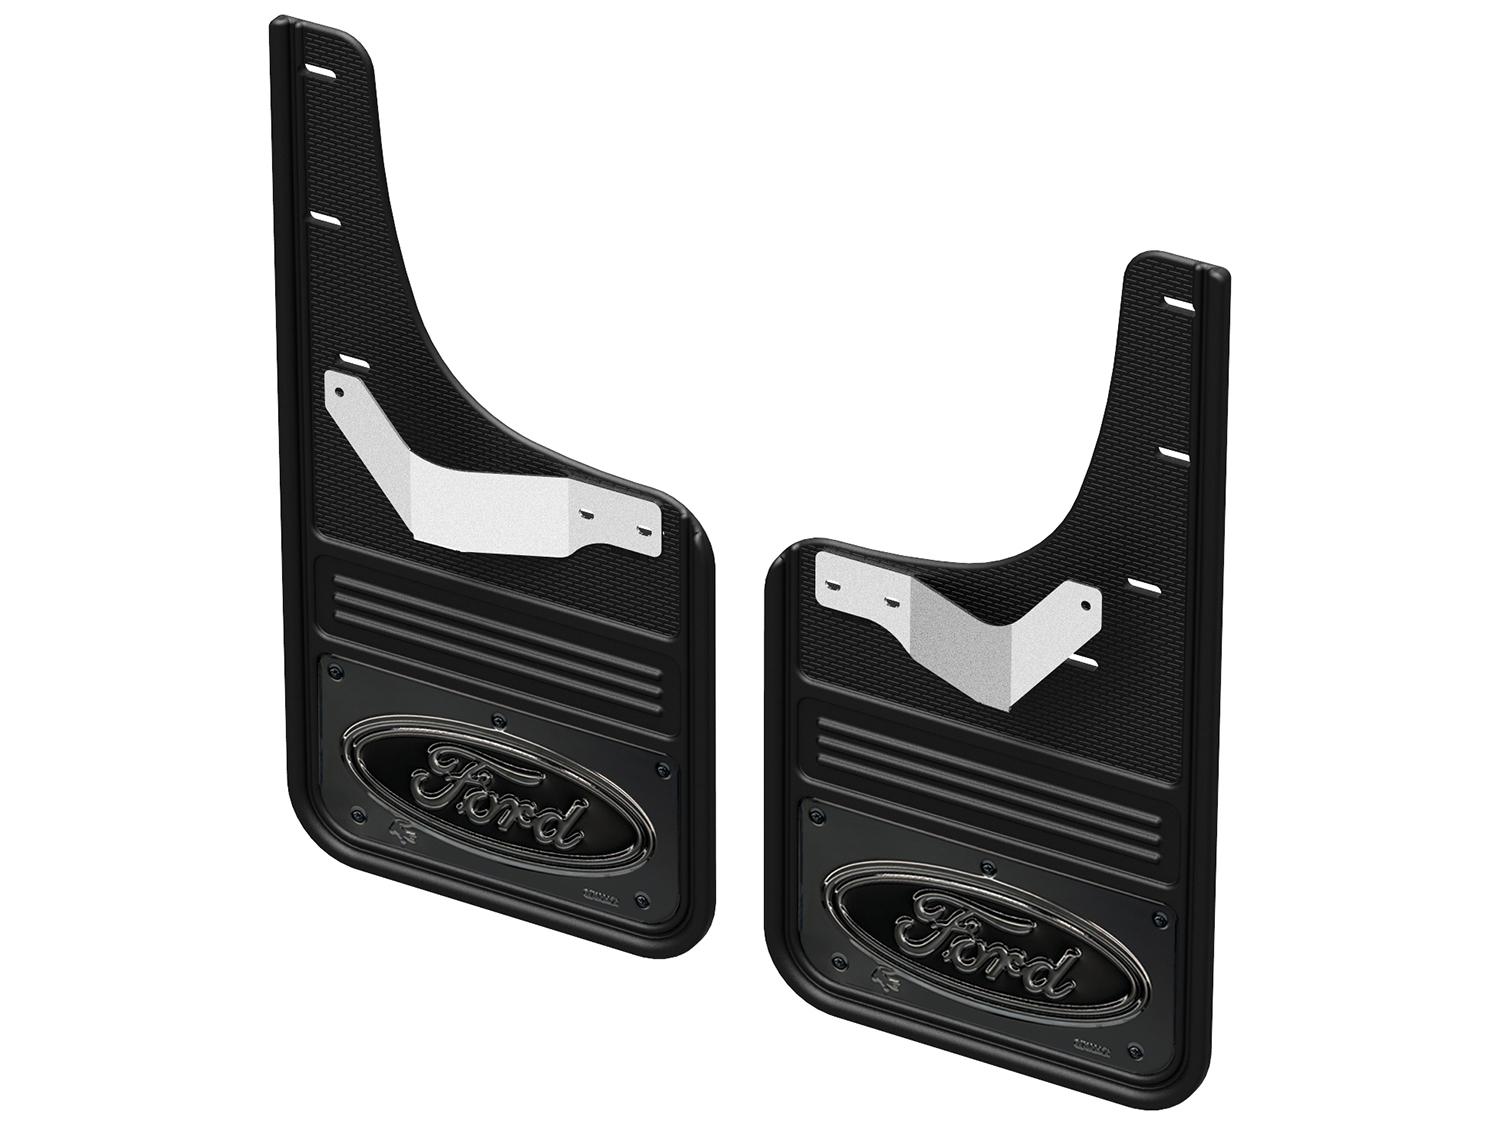 Image for Splash Guards - Gatorback, Rear Pair, Black Ford Oval on Gunmetal from AccessoriesCanada